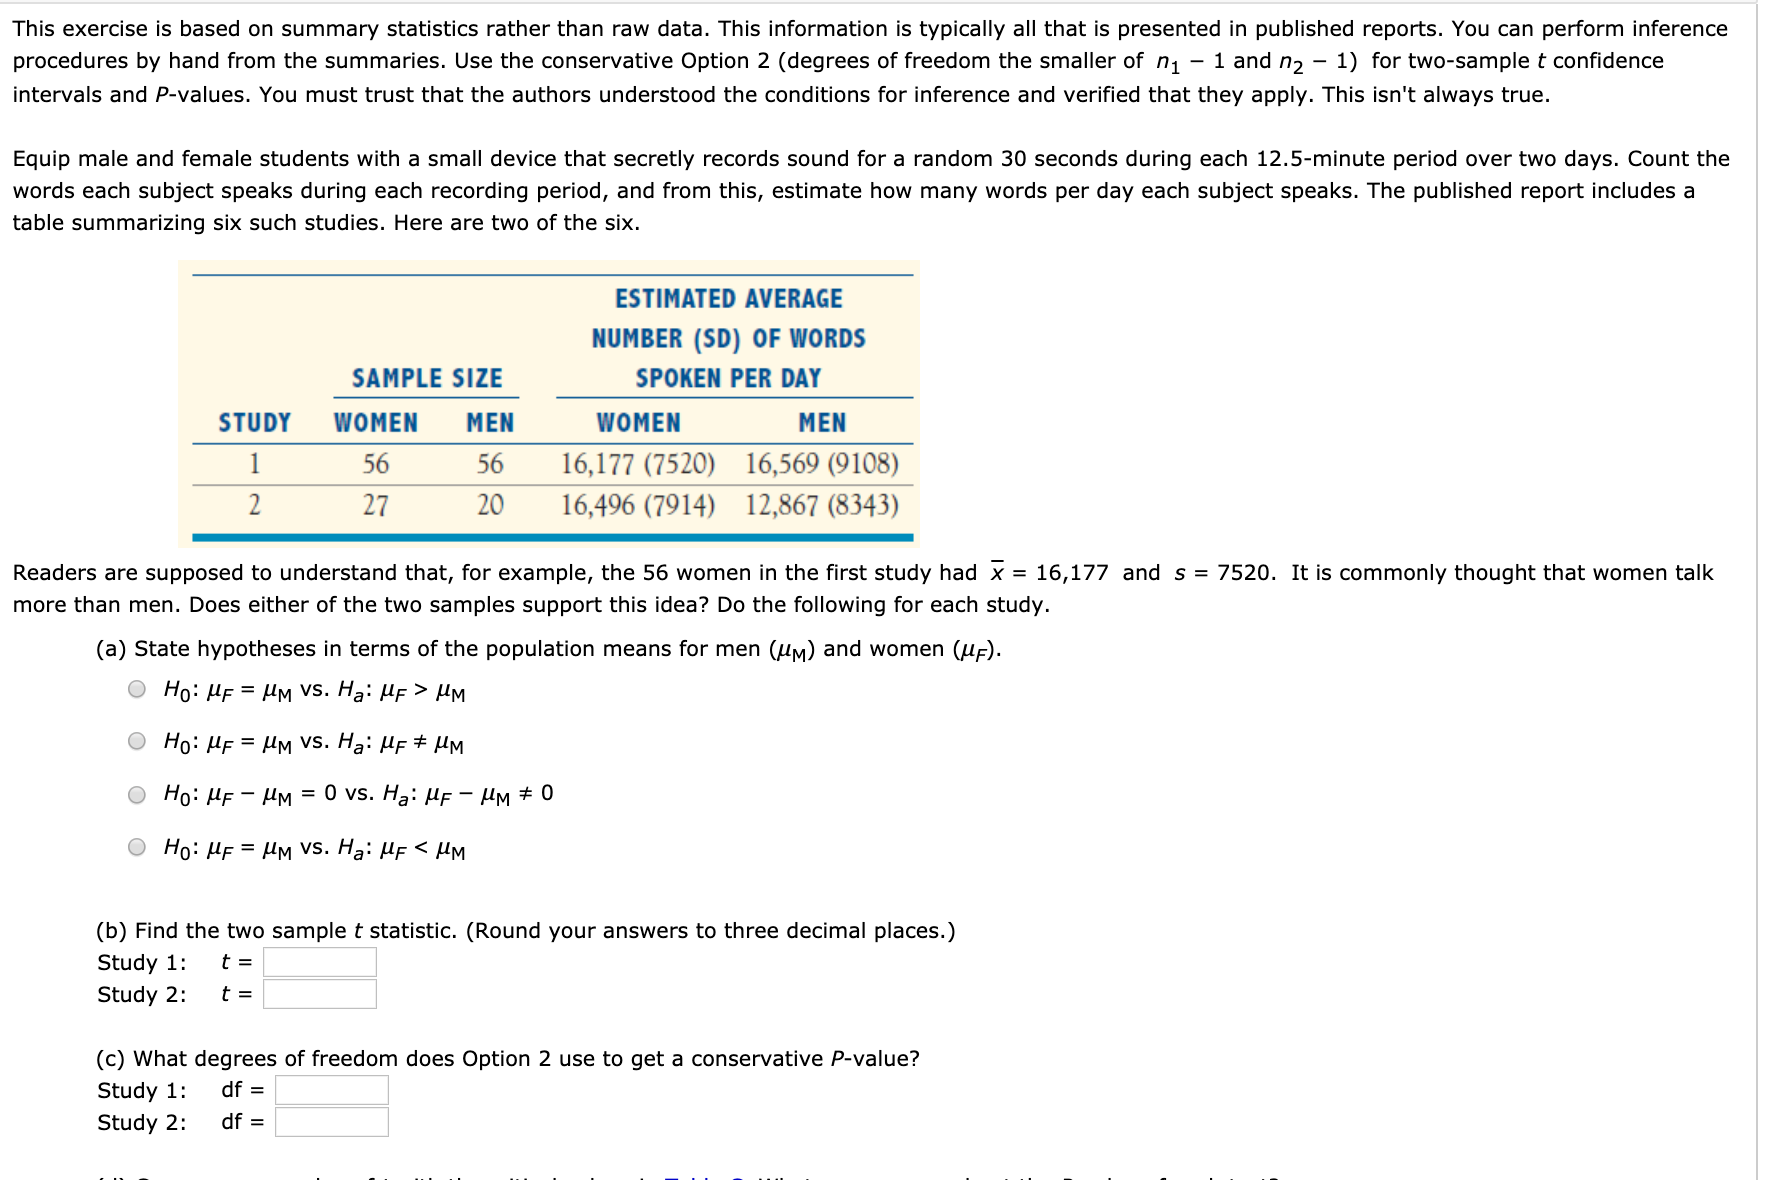 This exercise is based on summary statistics rather than raw data. This information is typically all that is presented in published reports. You can perform inference
procedures by hand from the summaries. Use the conservative Option 2 (degrees of freedom the smaller of n1
1 and n2
1) for two-sample t confidence
intervals and P-values. You must trust that the authors understood the conditions for inference and verified that they apply. This isn't always true.
Equip male and female students with a small device that secretly records sound for a random 30 seconds during each 12.5-minute period over two days. Count the
words each subject speaks during each recording period, and from this, estimate how many words per day each subject speaks. The published report includes a
table summarizing six such studies. Here are two of the six.
ESTIMATED AVERAGE
NUMBER (SD) OF WORDS
SAMPLE SIZE
SPOKEN PER DAY
STUDY
WOMEN
MEN
WOMEN
MEN
1
56
56
16,177 (7520)
16,569 (9108)
27
20
16,496 (7914)
12,867 (8343)
Readers are supposed to understand that, for example, the 56 women in the first study had x = 16,177 and s = 7520. It is commonly thought that women talk
more than men. Does either of the two samples support this idea? Do the following for each study.
(a) State hypotheses in terms of the population means for men (uM) and women (uF).
Но: МЕ — Им Vs. Ha: MF > Mм
Ho: HF = UM Vvs. Hạ: HF # µM
Но: ИЕ — Им
%3D 0 vs. Ha: Иғ — Им + 0
Но: МЕ — Им Vs. Ha: MF < Mм
(b) Find the two sample t statistic. (Round your answers to three decimal places.)
Study 1:
Study 2:
(c) What degrees of freedom does Option 2 use to get a conservative P-value?
Study 1:
df =
Study 2:
df =
